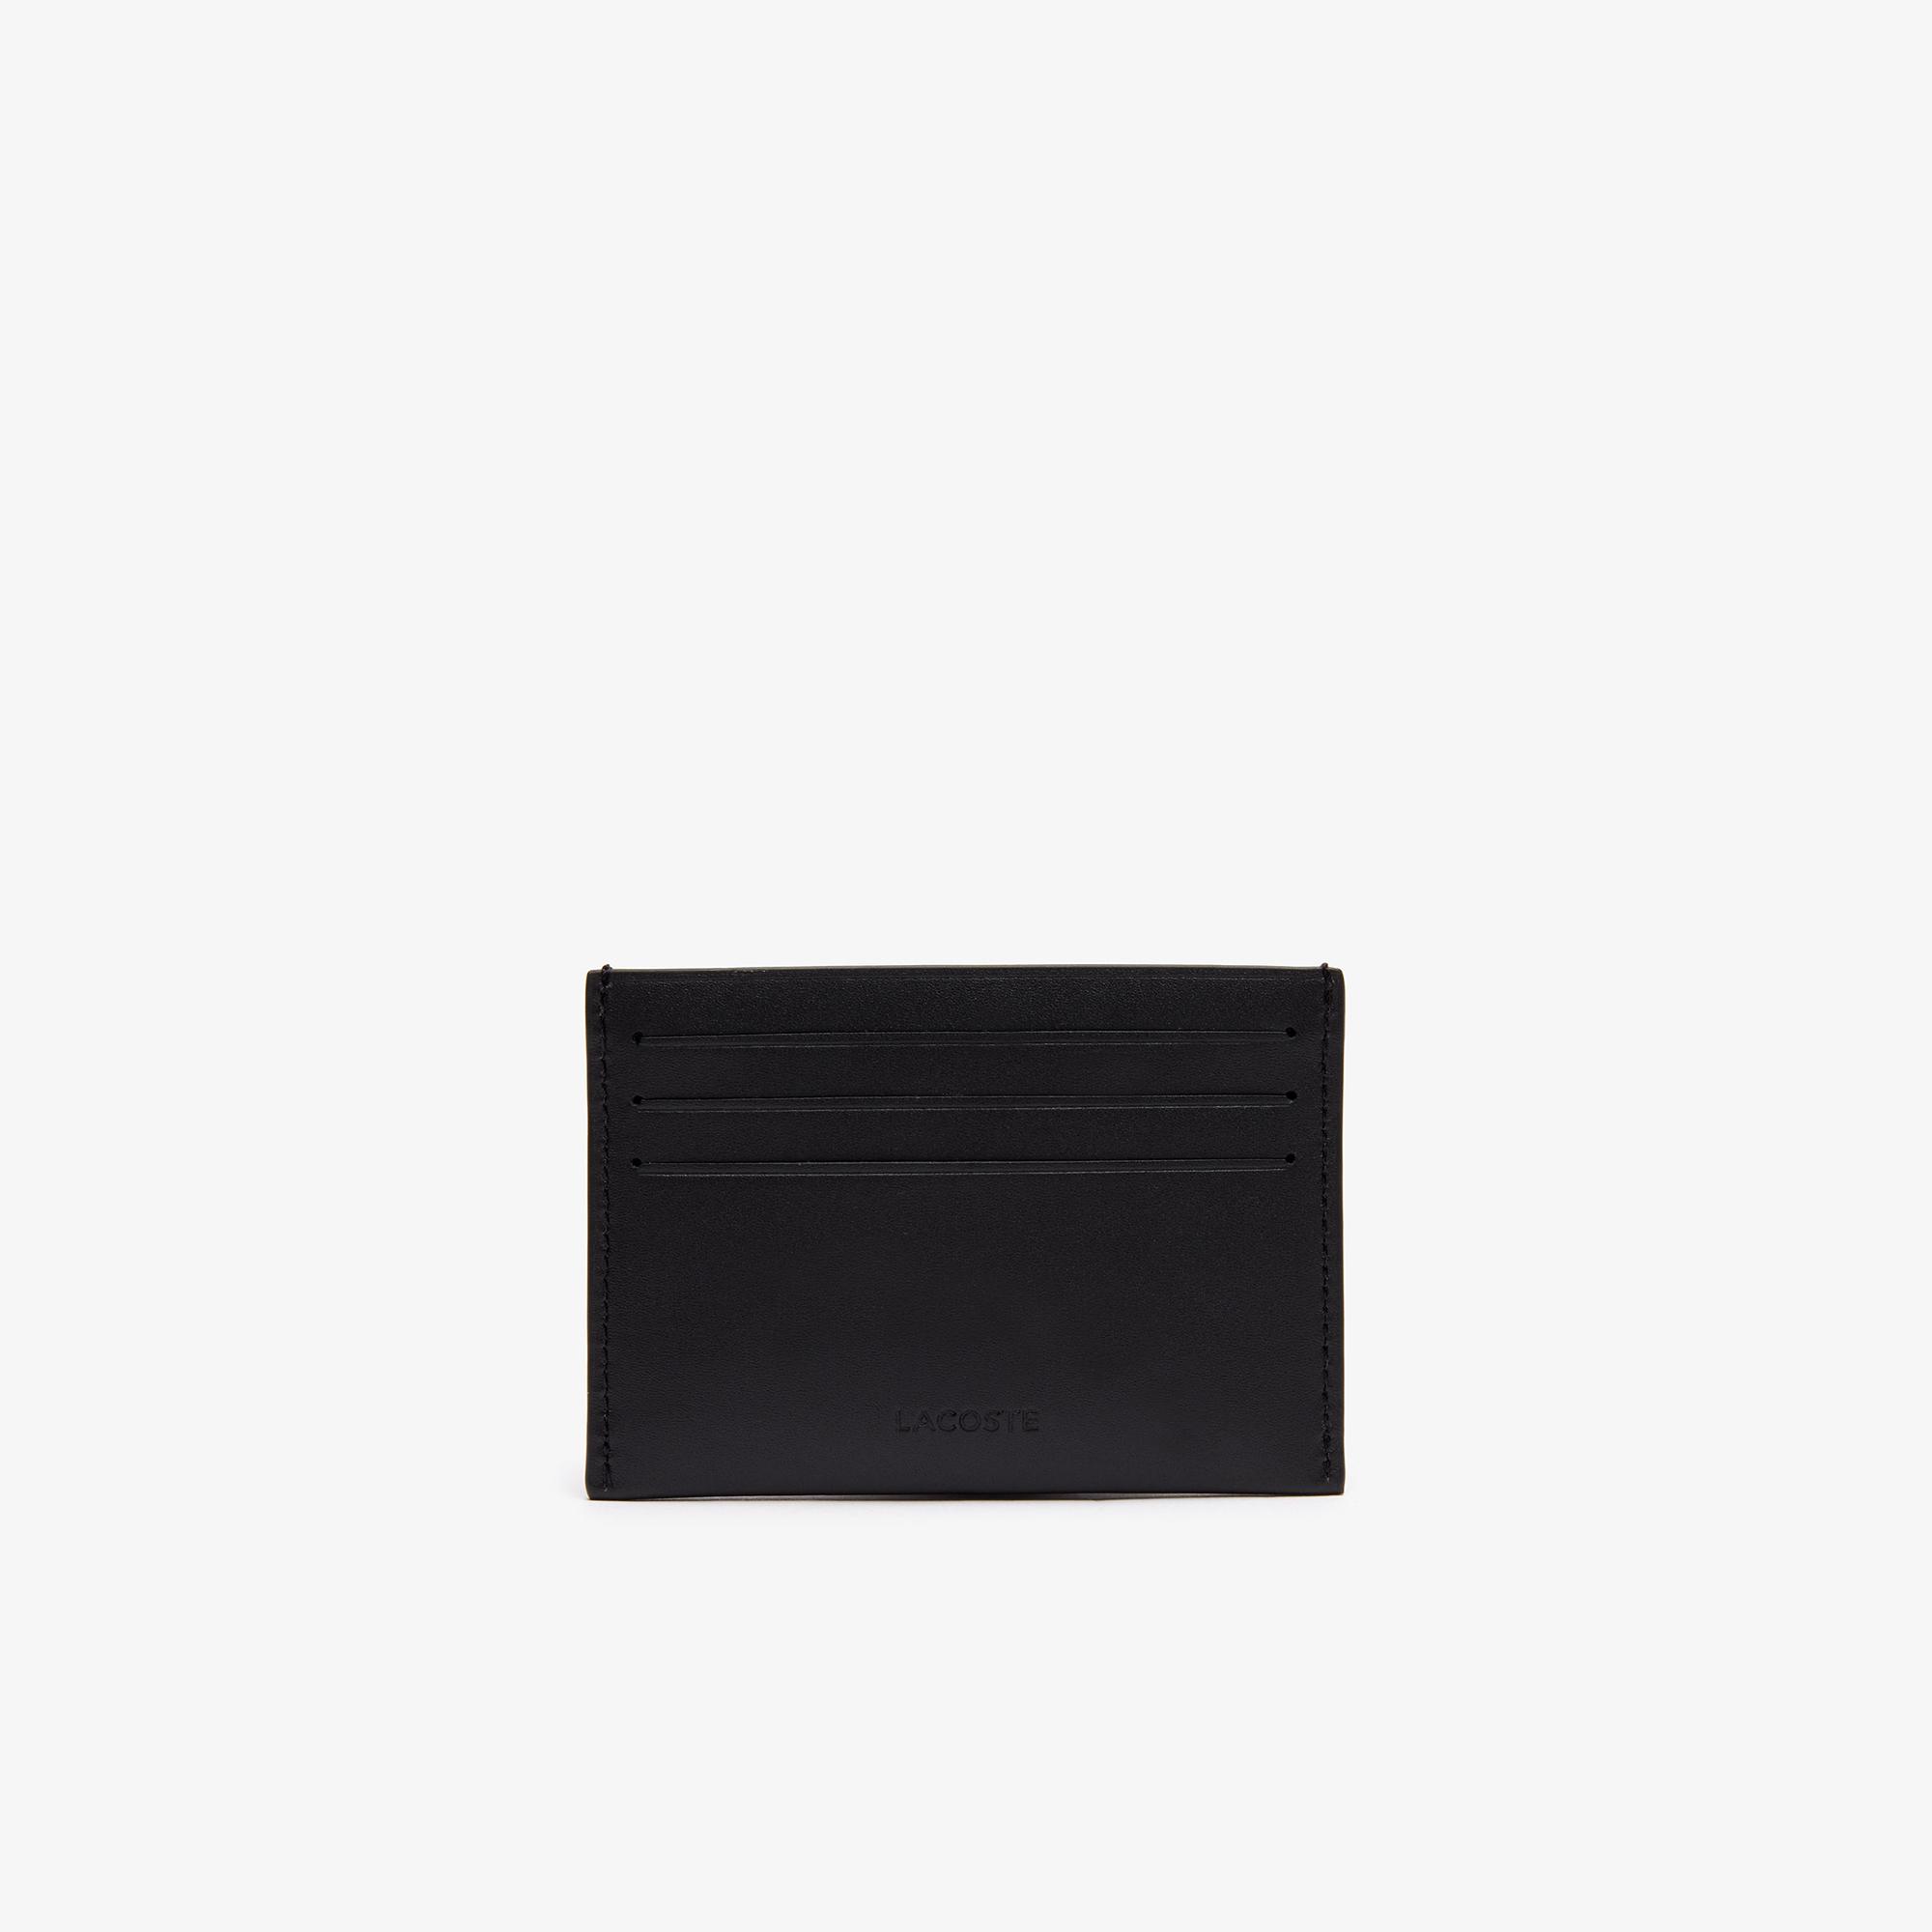 Lacoste Men's Fitzgerald Credit Card Holder İn Leather